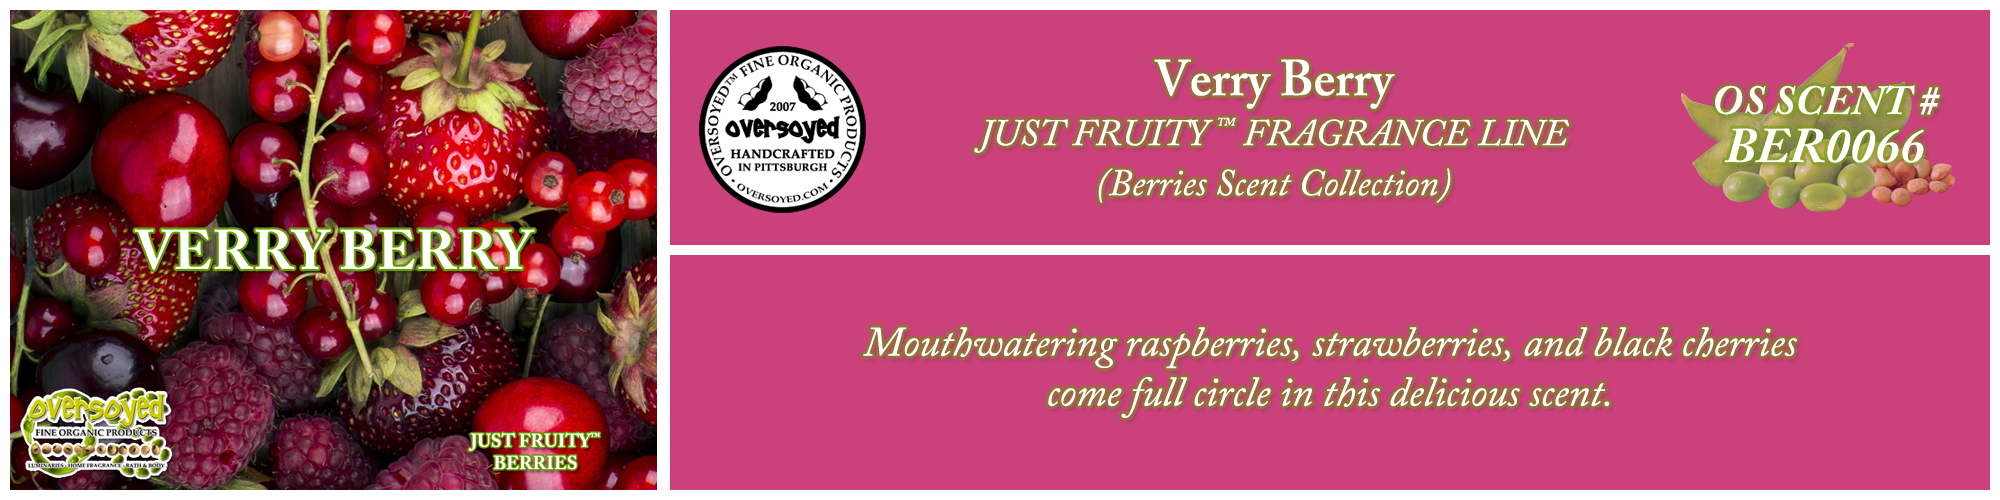 Verry Berry Handcrafted Products Collection